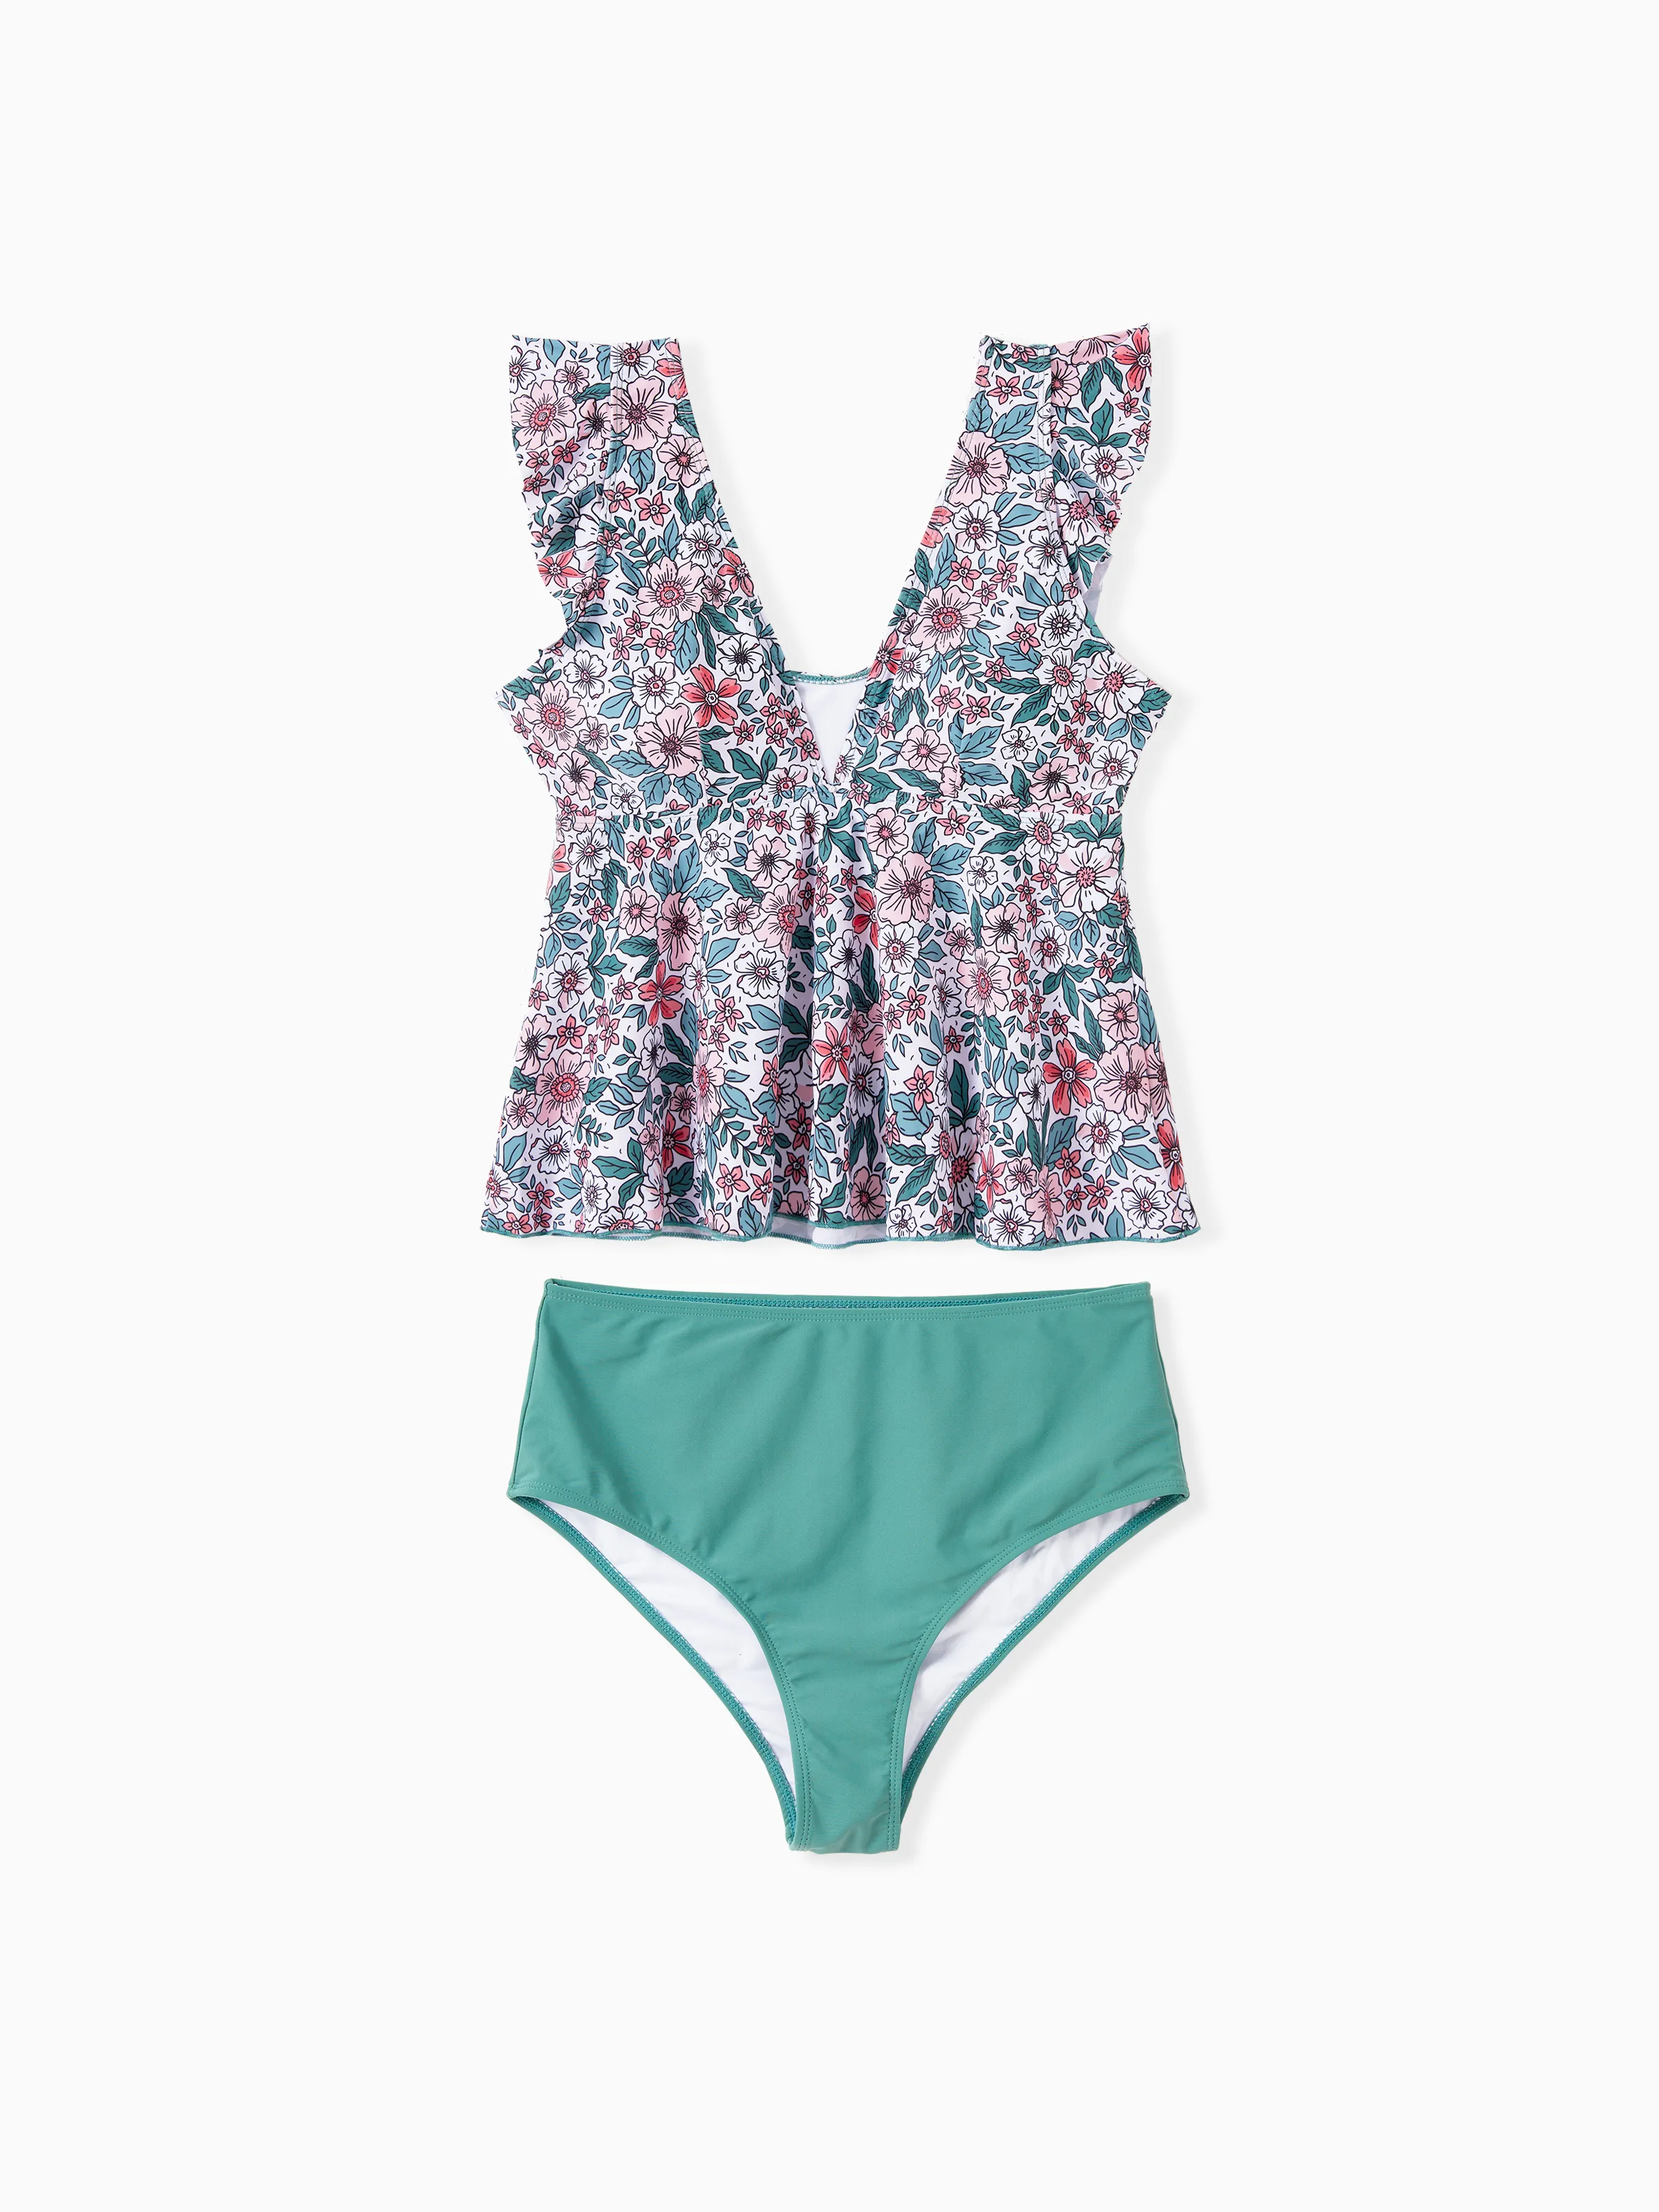 

Family Matching Swimsuits Color Block Drawstring Swim Trunks or Floral Top High Waist Bottom Tankini